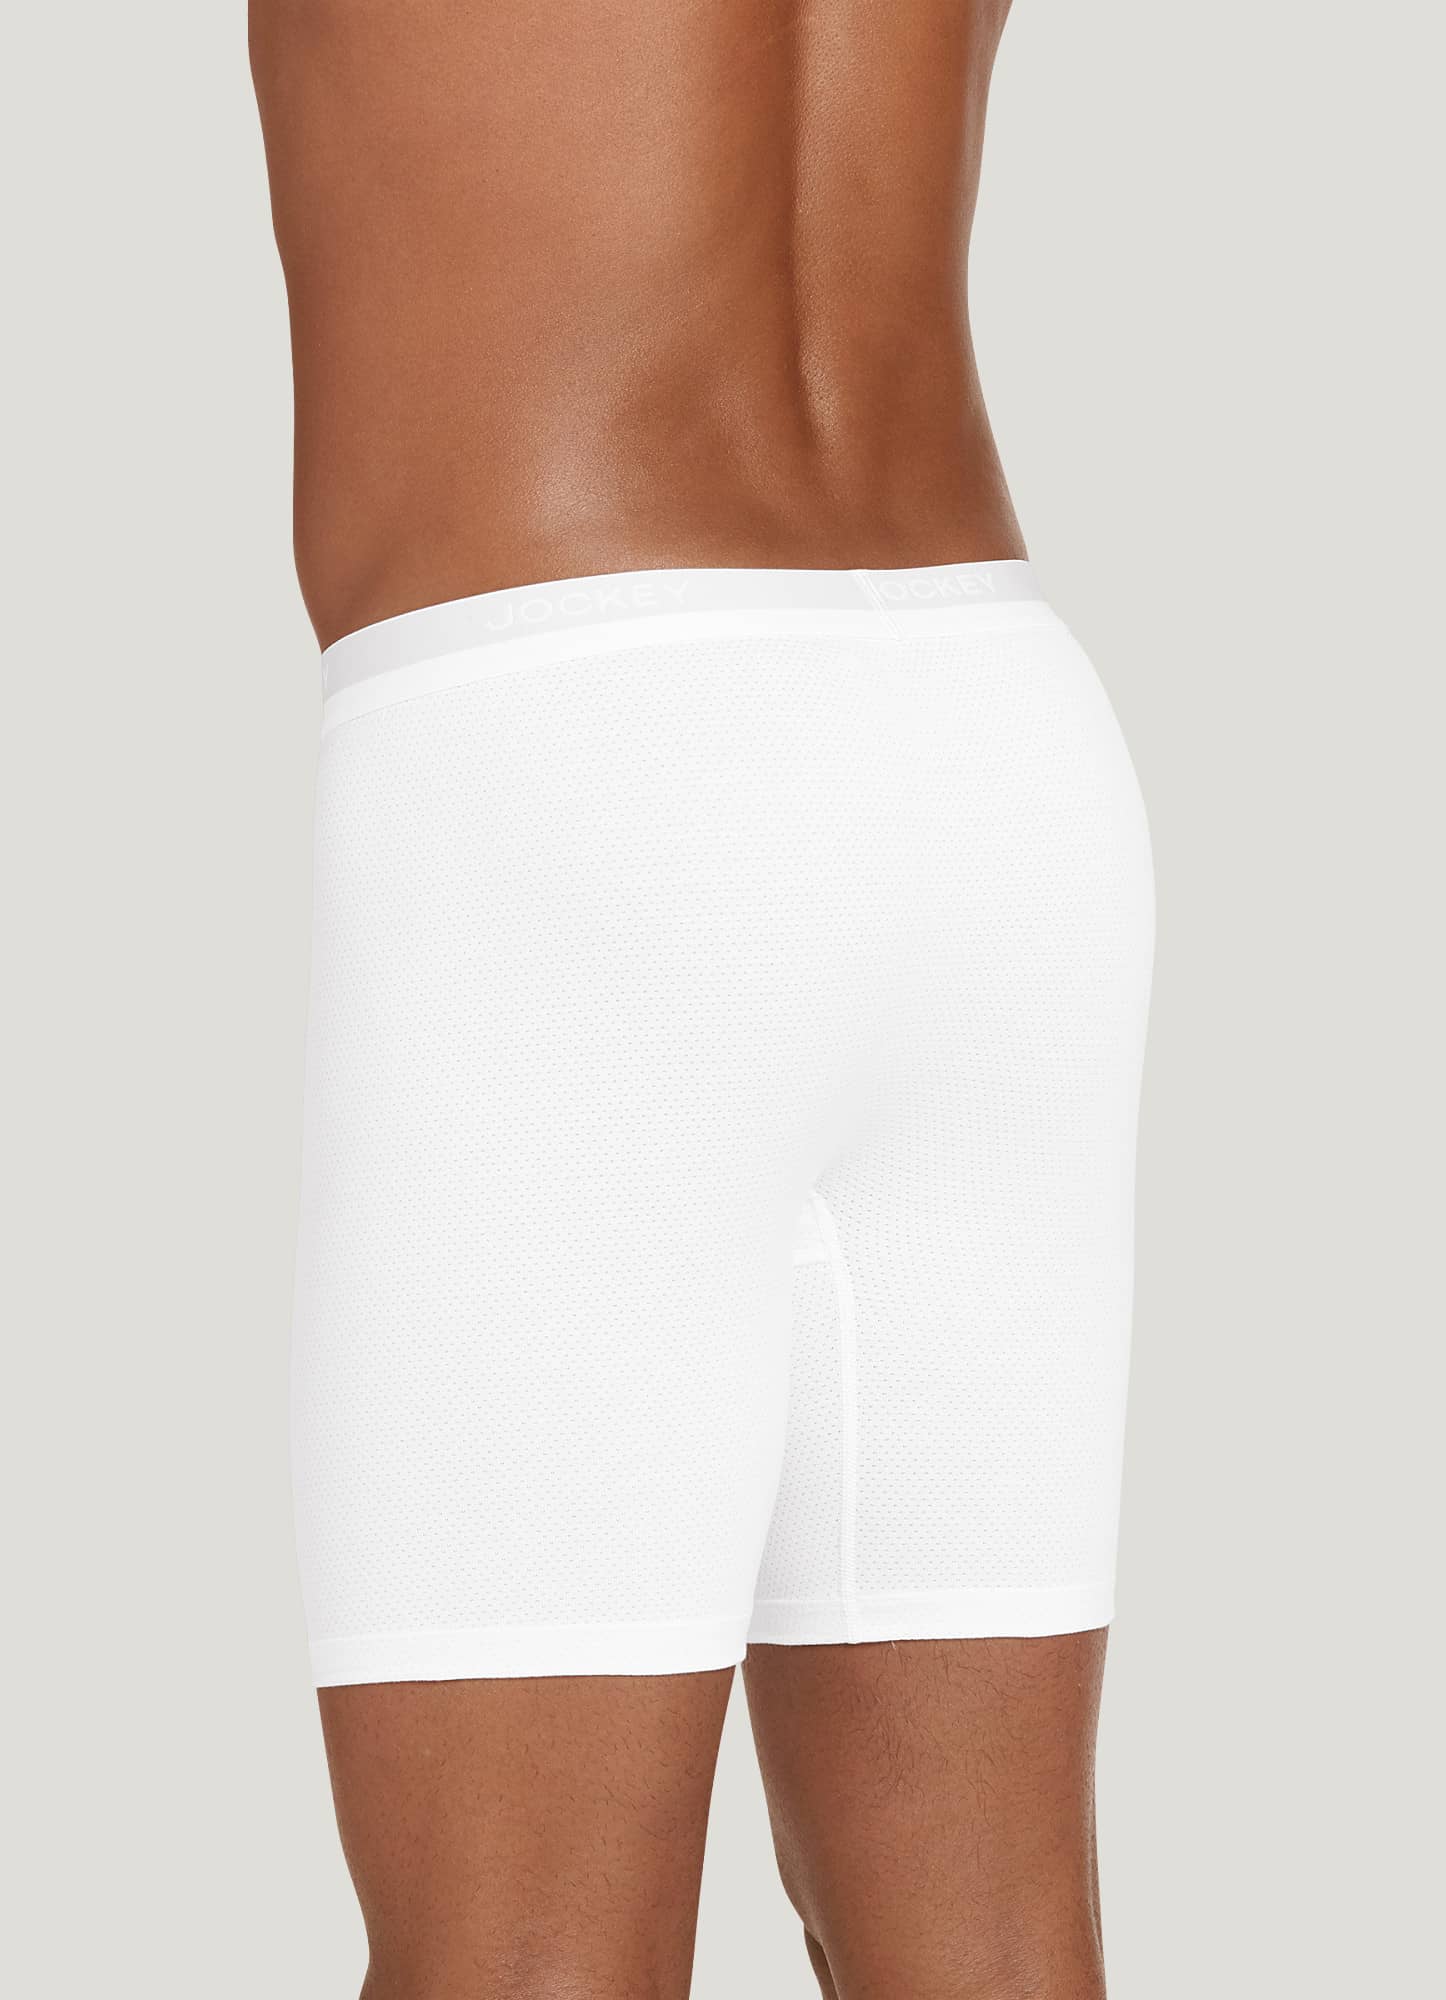 Big and Tall Jockey Boxer Briefs by  - Underwear & Undershirts in  Whites & Colors to Sizes 6XLT and 12XB